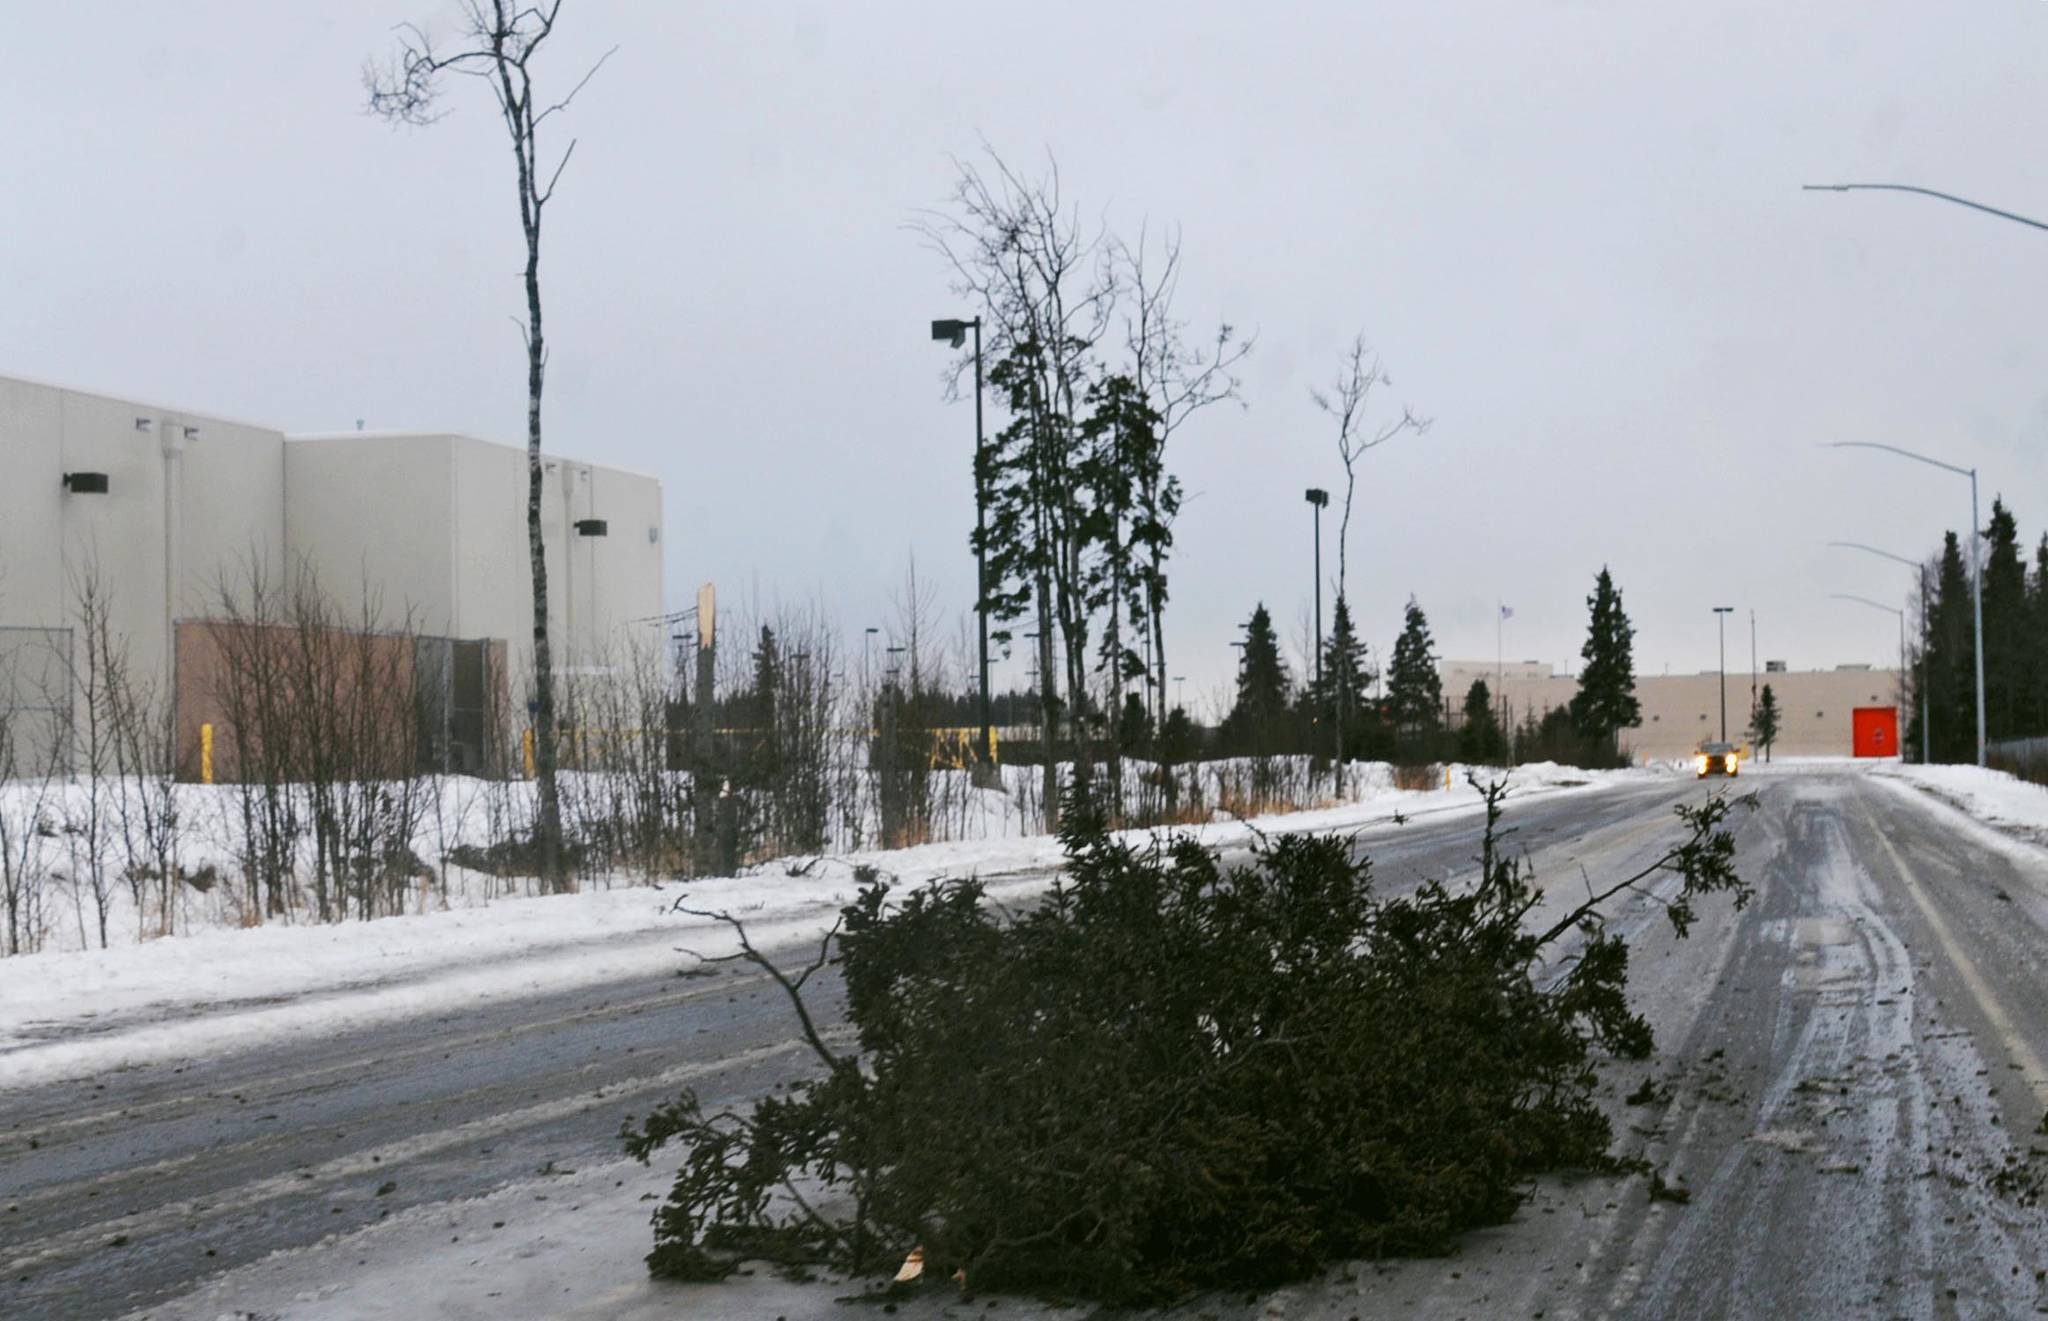 A broken black spruce tree lies in the middle of Baron Park Road behind the old Lowe’s building on Monday, Dec. 4, 2017 in Kenai, Alaska. Gusts of wind up to 55 miles per hour whipped across the western Kenai Peninsula on Monday afternoon, knocking power lines and trees down and keeping first responders busy. (Photo by Elizabeth Earl/Peninsula Clarion)